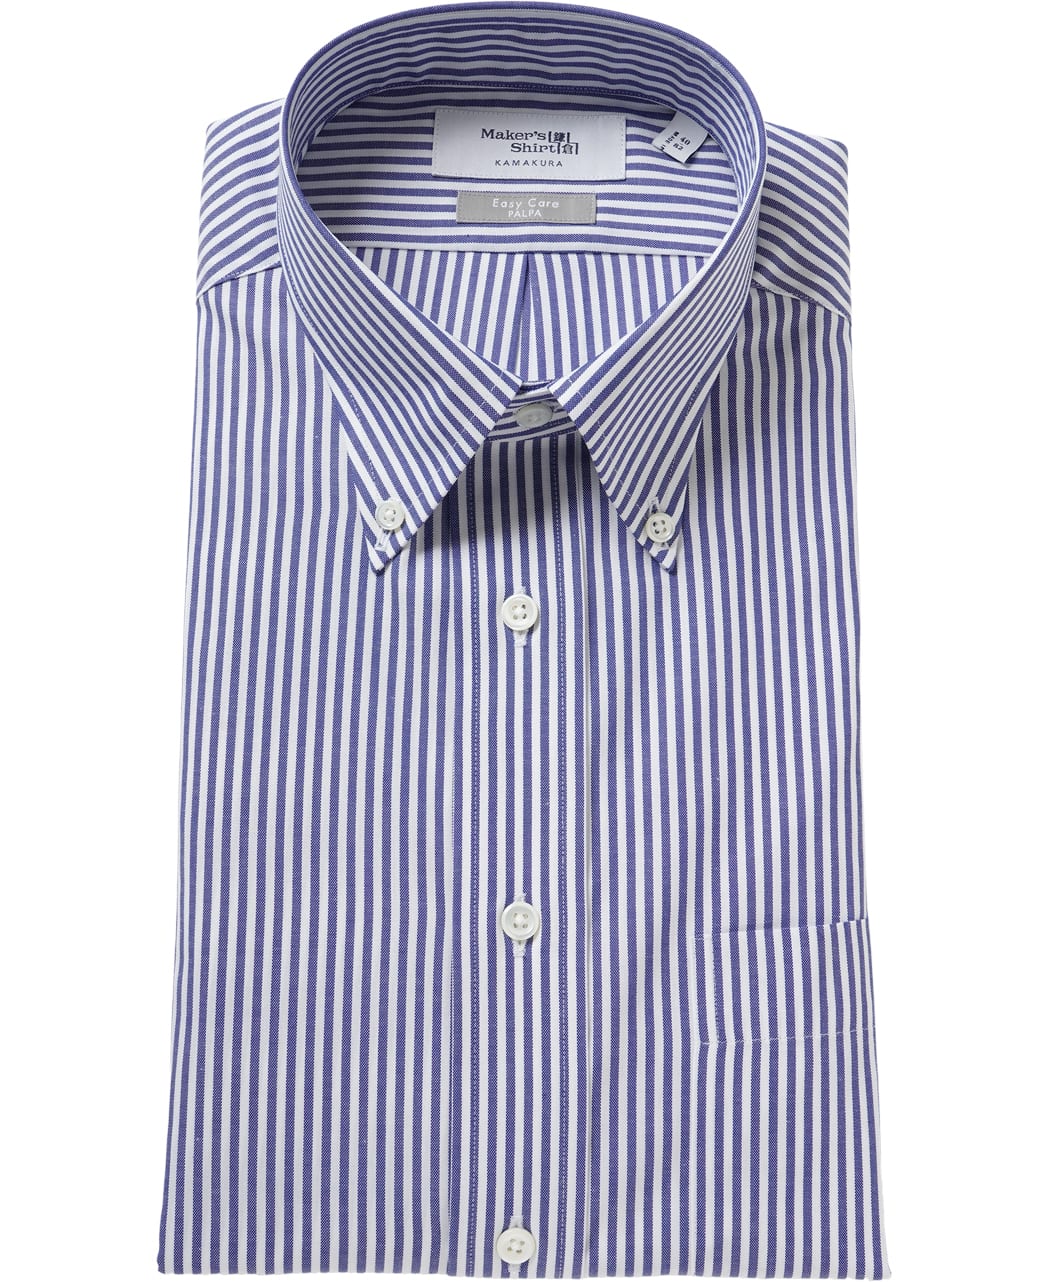 TOKYO CLASSIC FIT - Button Down Pinpoint Oxford PALPA EASY CARE